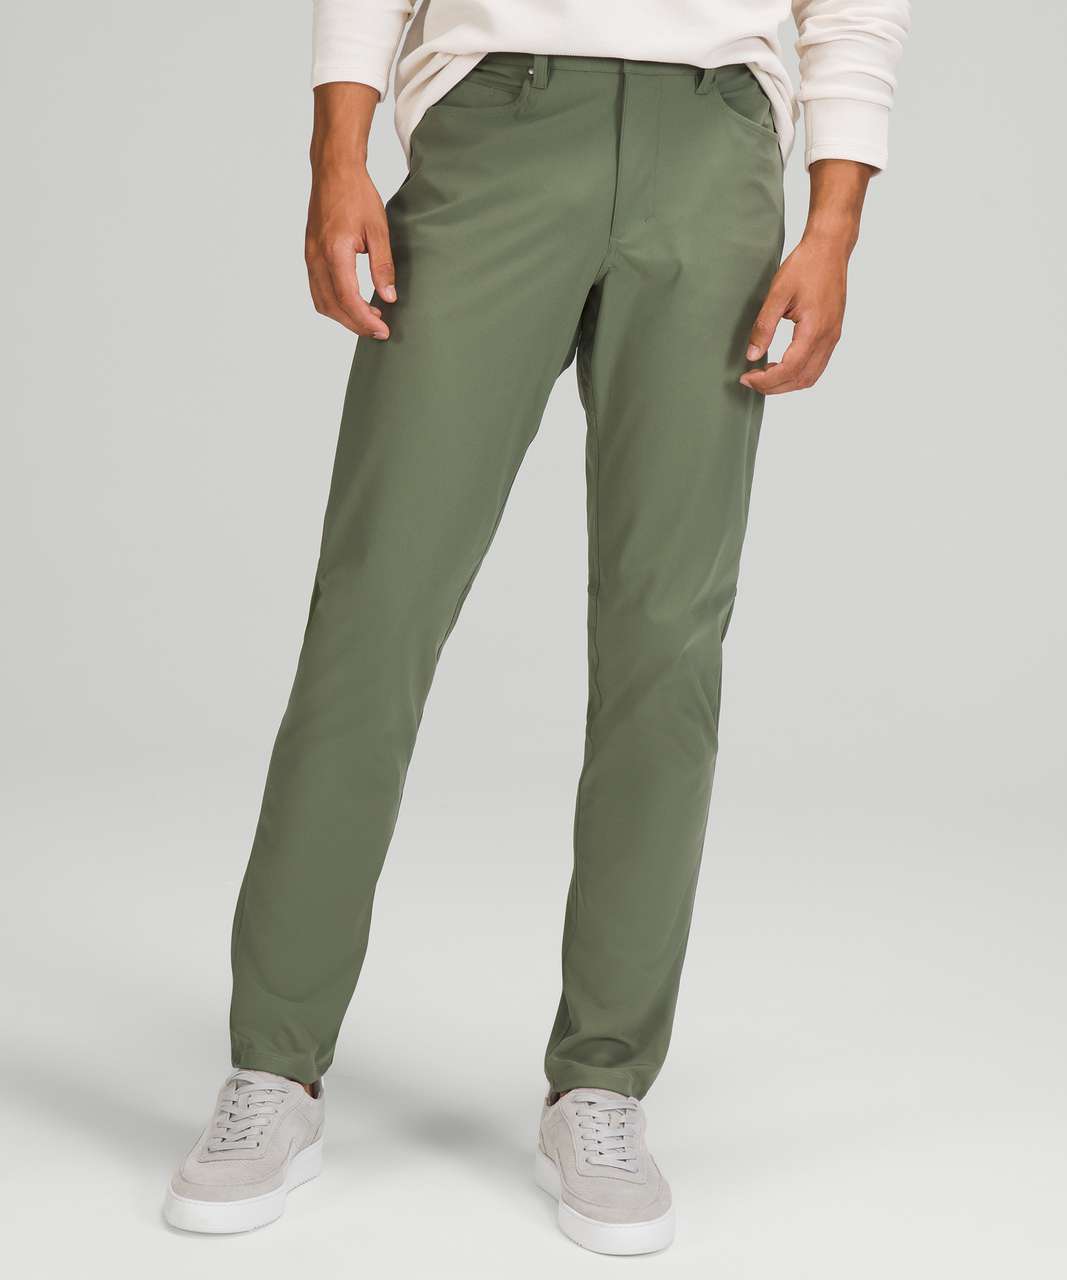 Lululemon Abc Pant Classic Reviewed  International Society of Precision  Agriculture